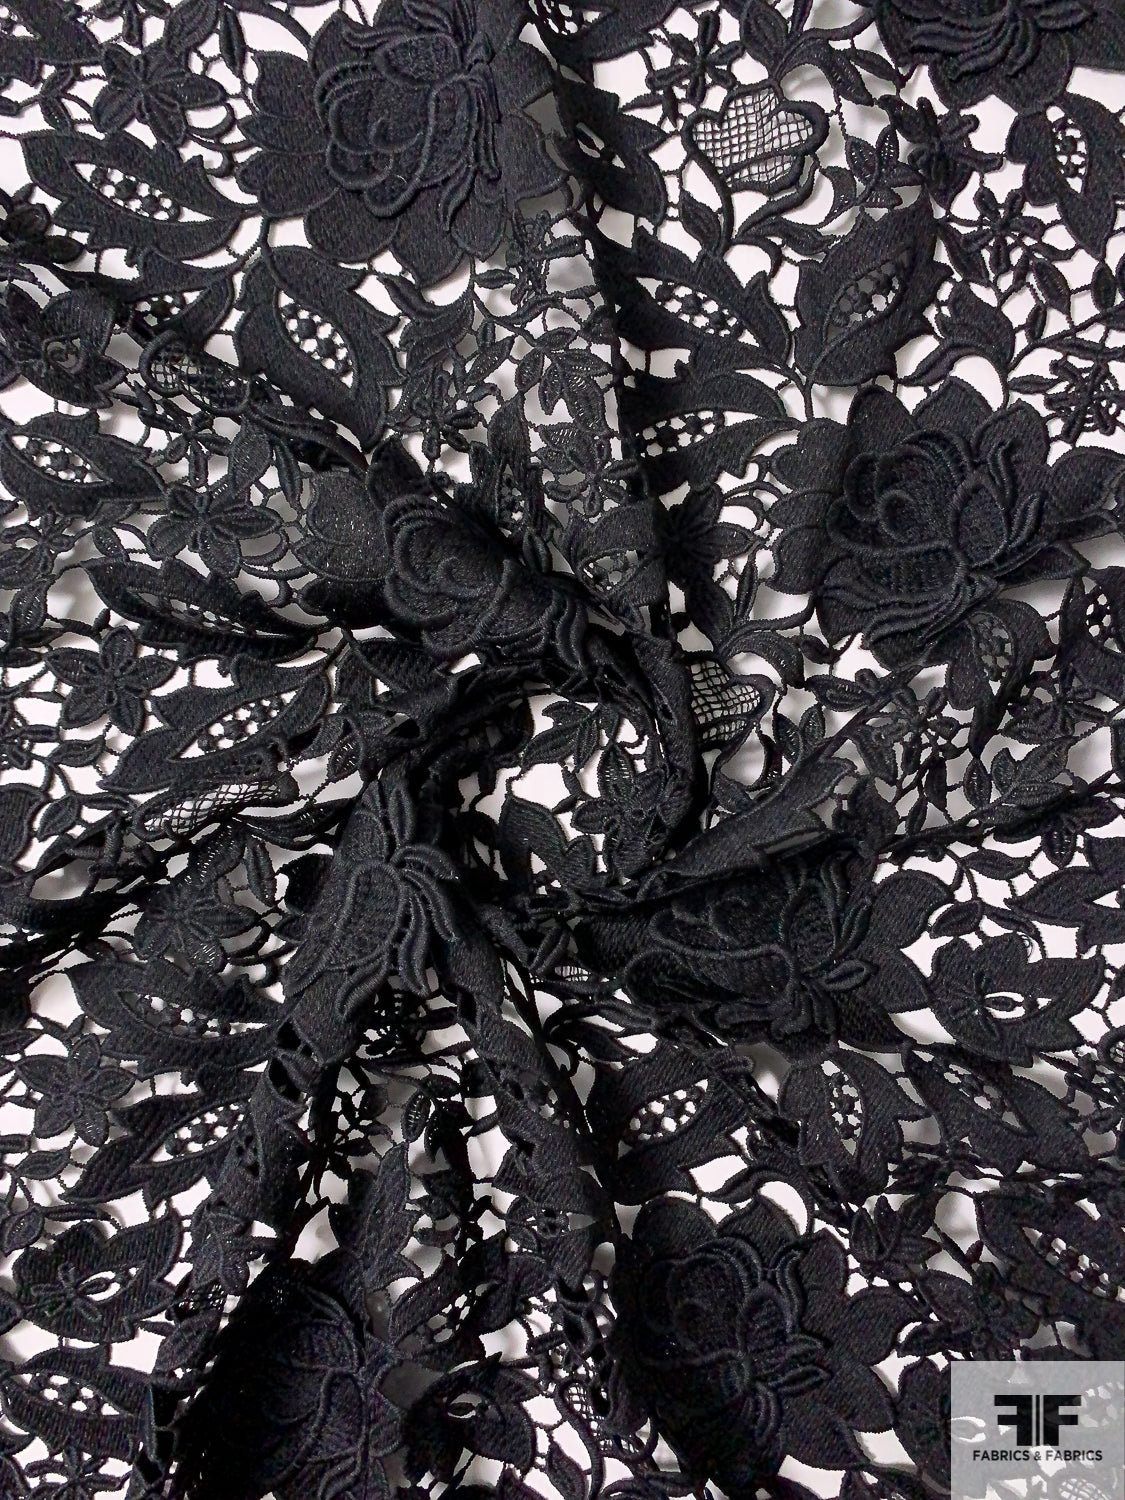 Lela Rose 3D Floral Guipure Lace - Black - Fabric by the Yard